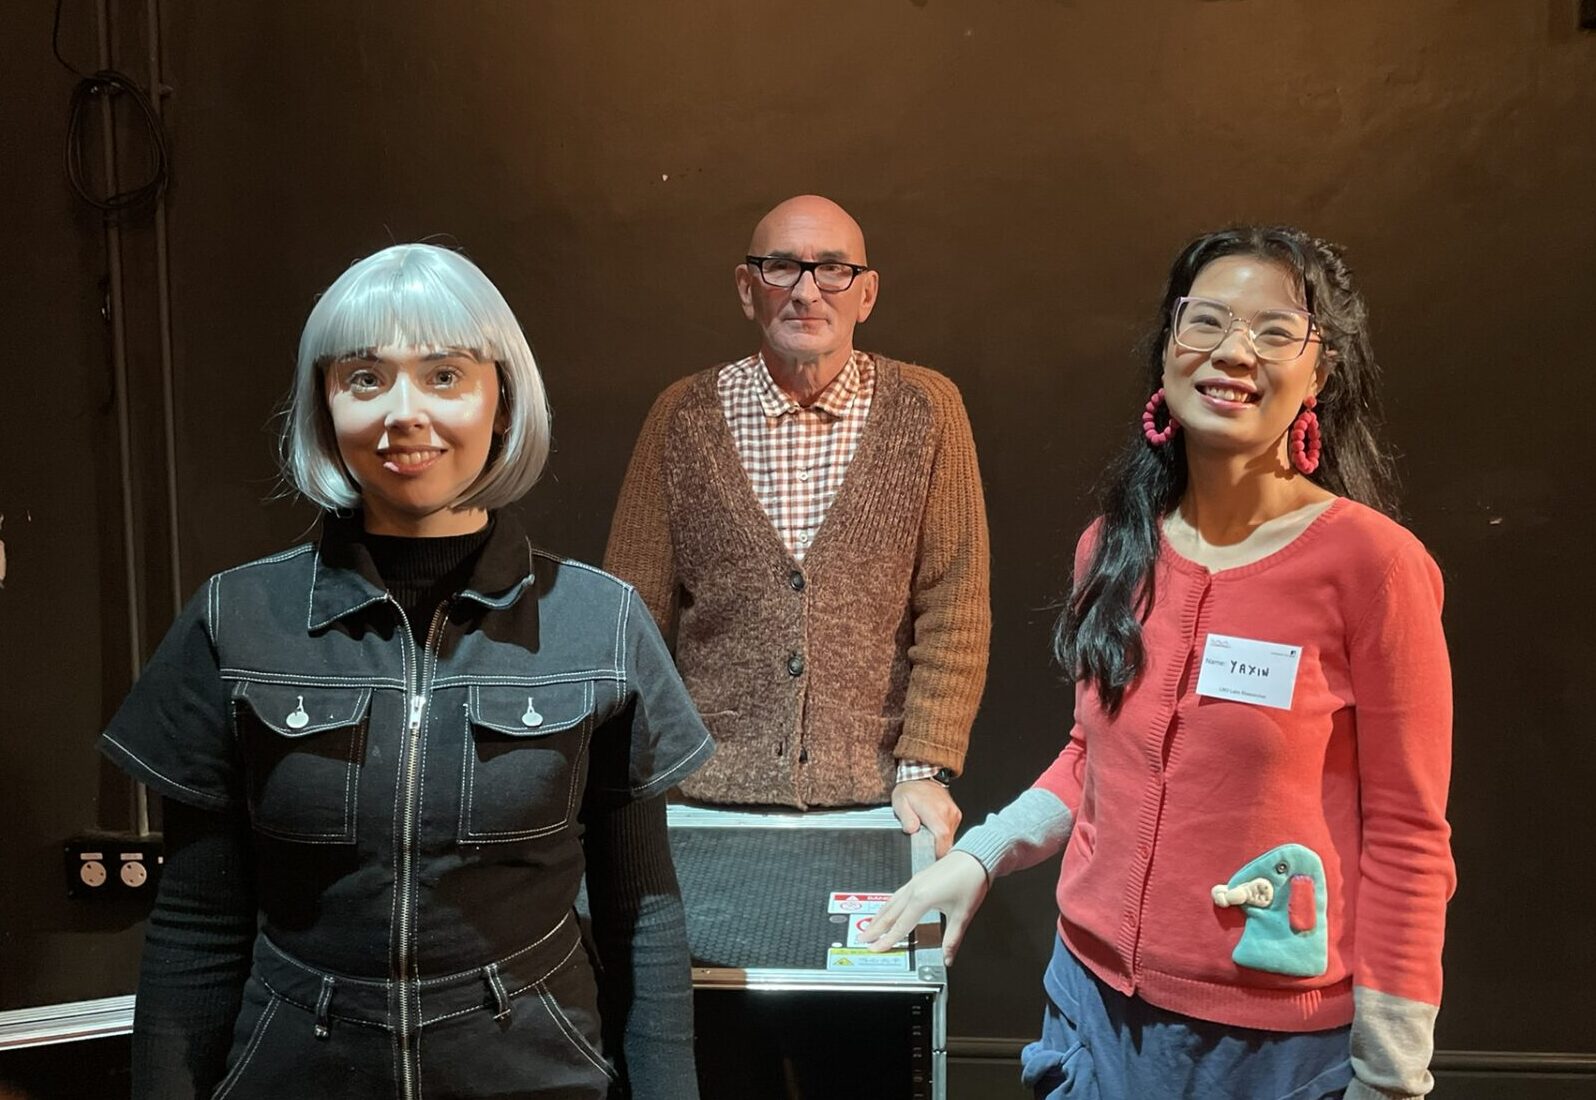 Three people appear in the photograph standing in a theatre with black back drop. A female actor stands on the left dressed in black and wearing a silver wig. A male wearing glasses, a checked shirt and brown cardigan stands in the centre. A female actor wearing glasses, a bright pink cardigan and pink hoop earrings stands at the right. She wears a name tag labelled Yaxin.